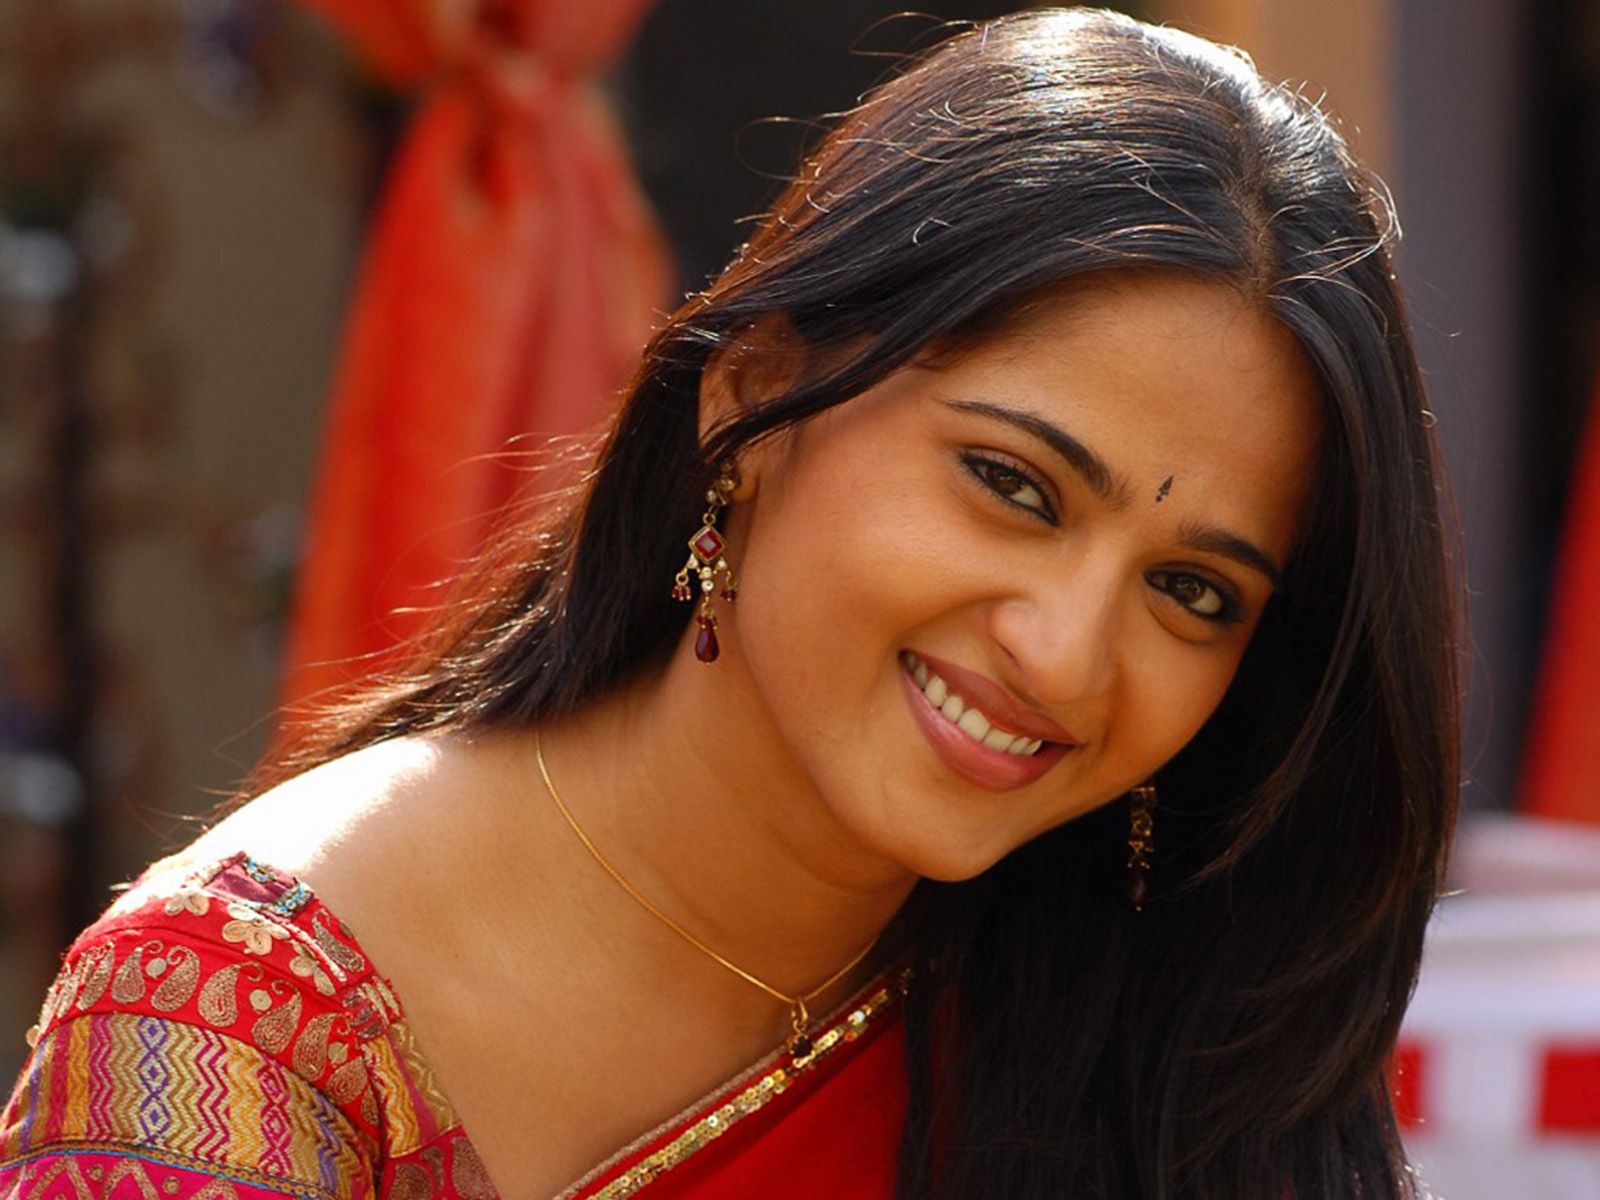 Free download South Indian Actress Anushka Shetty Wallpaper 2013 Wallpaper HD FREE [1600x1200] for your Desktop, Mobile & Tablet. Explore Bollywood Actresses Wallpaper HD 2013. Indian Actress Wallpaper, Bollywood